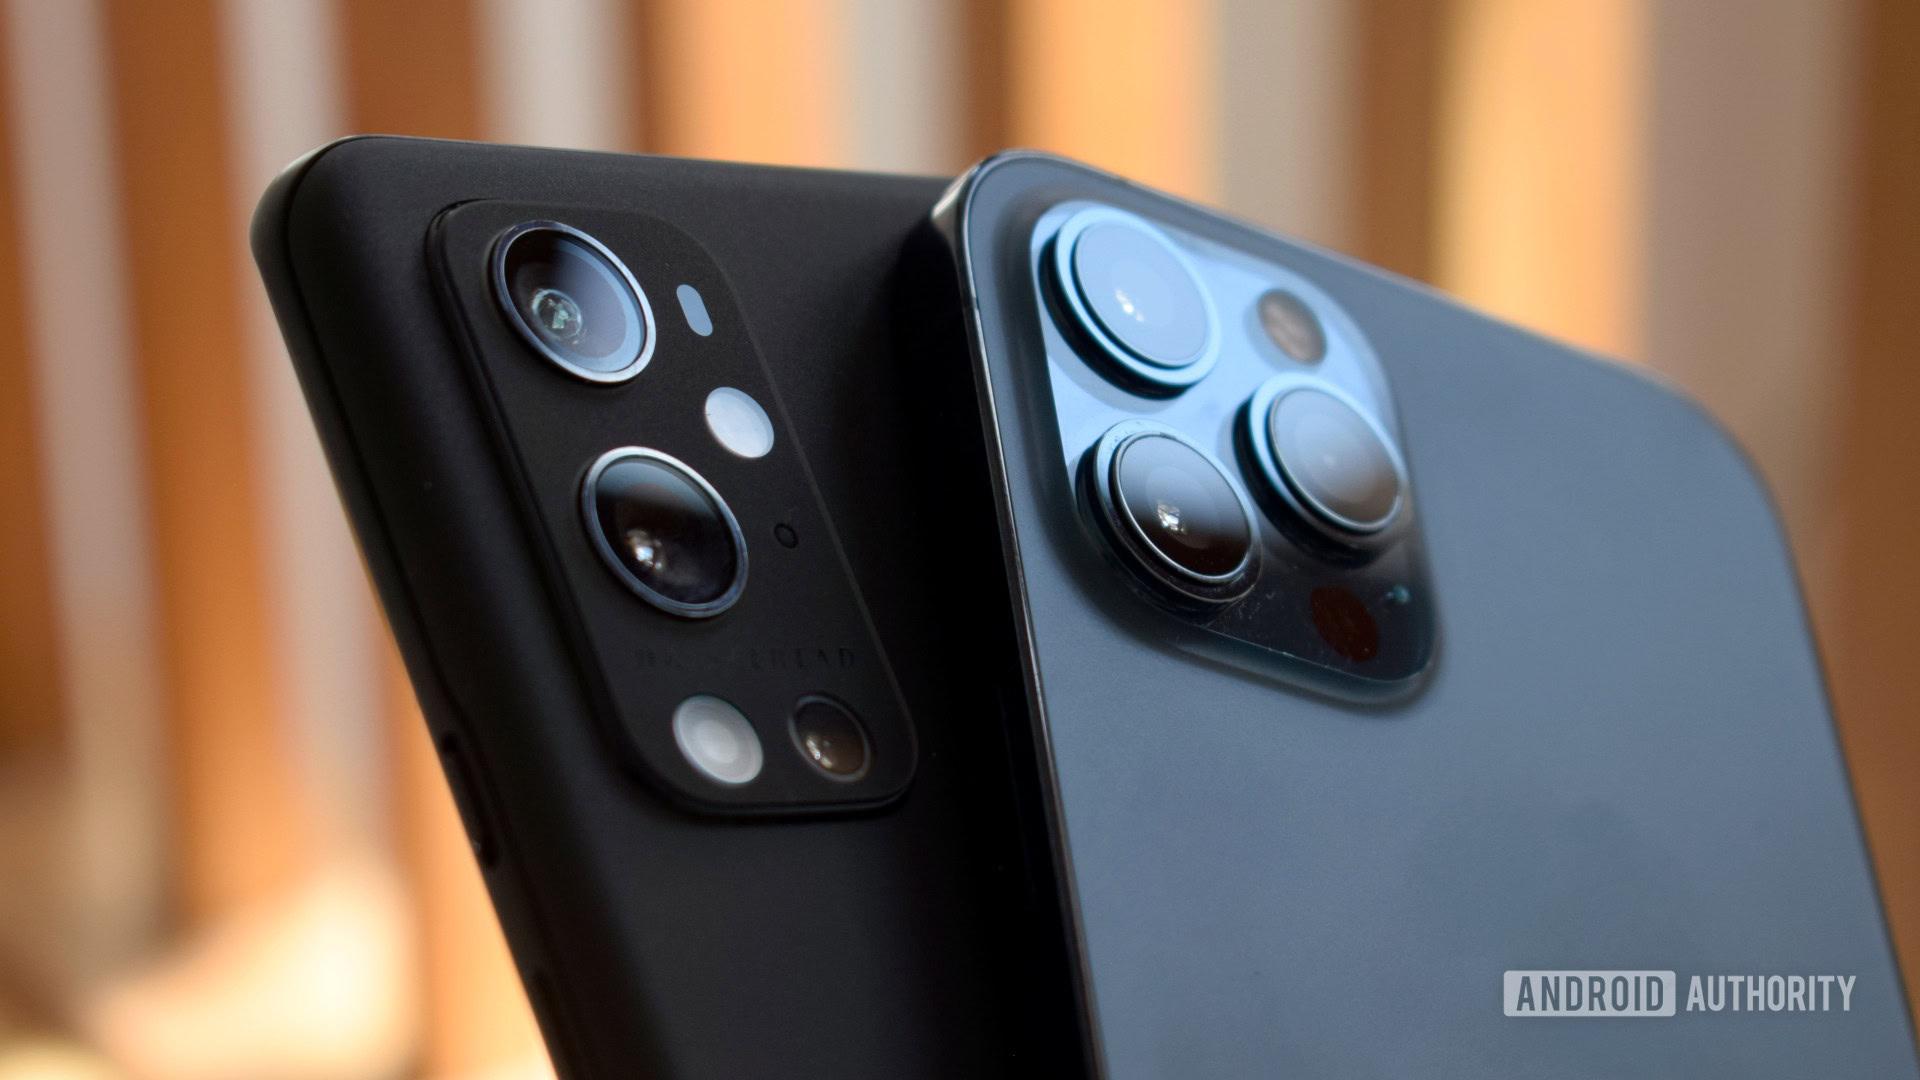 https://www.androidauthority.com/wp-content/uploads/2021/04/OnePlus-9-Pro-vs-Apple-iPhone-12-Pro-Max-camera.jpg